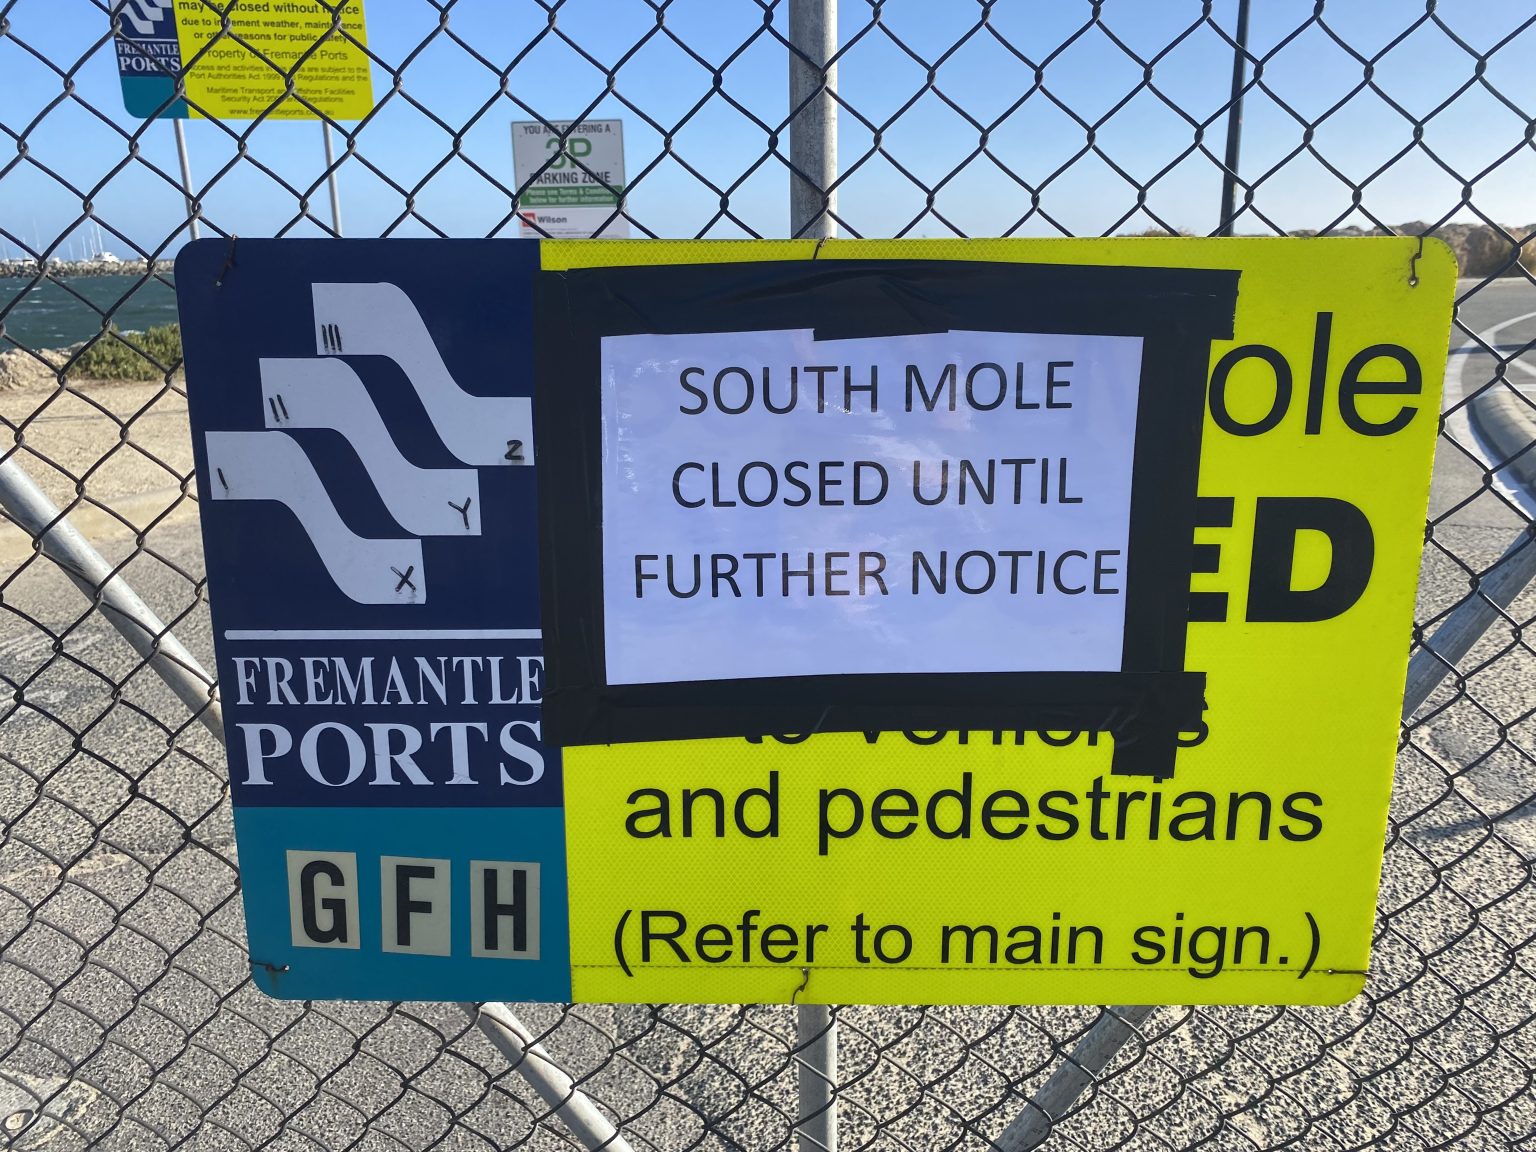 South Mole & Access for Seniors - Letter to the Editor